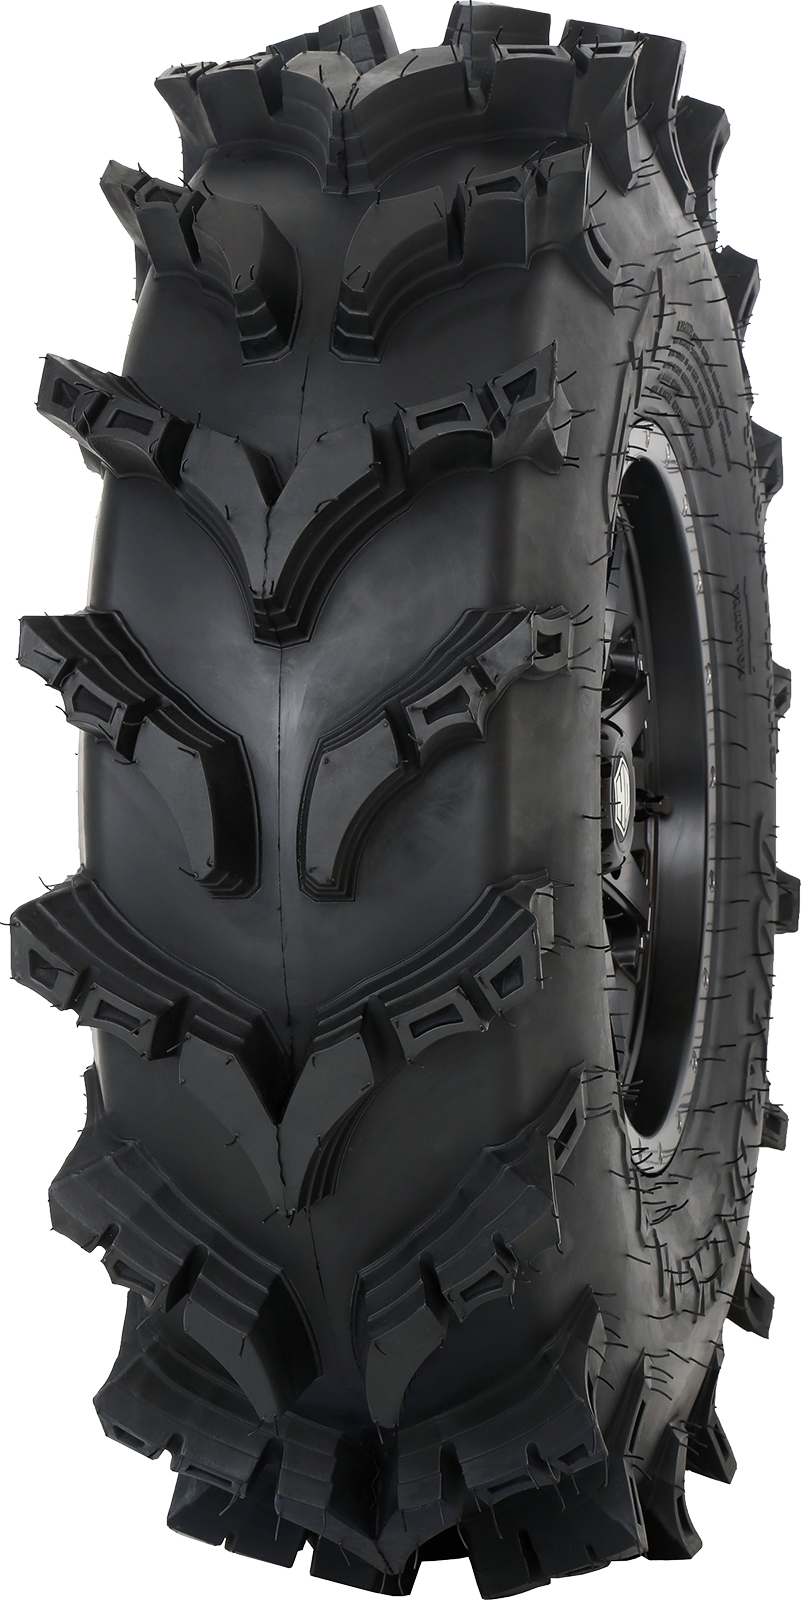 STI TIRE & WHEEL Tire - Out & Back Max - Front/Rear - 30x9.5-14 - 8 Ply 001-1326